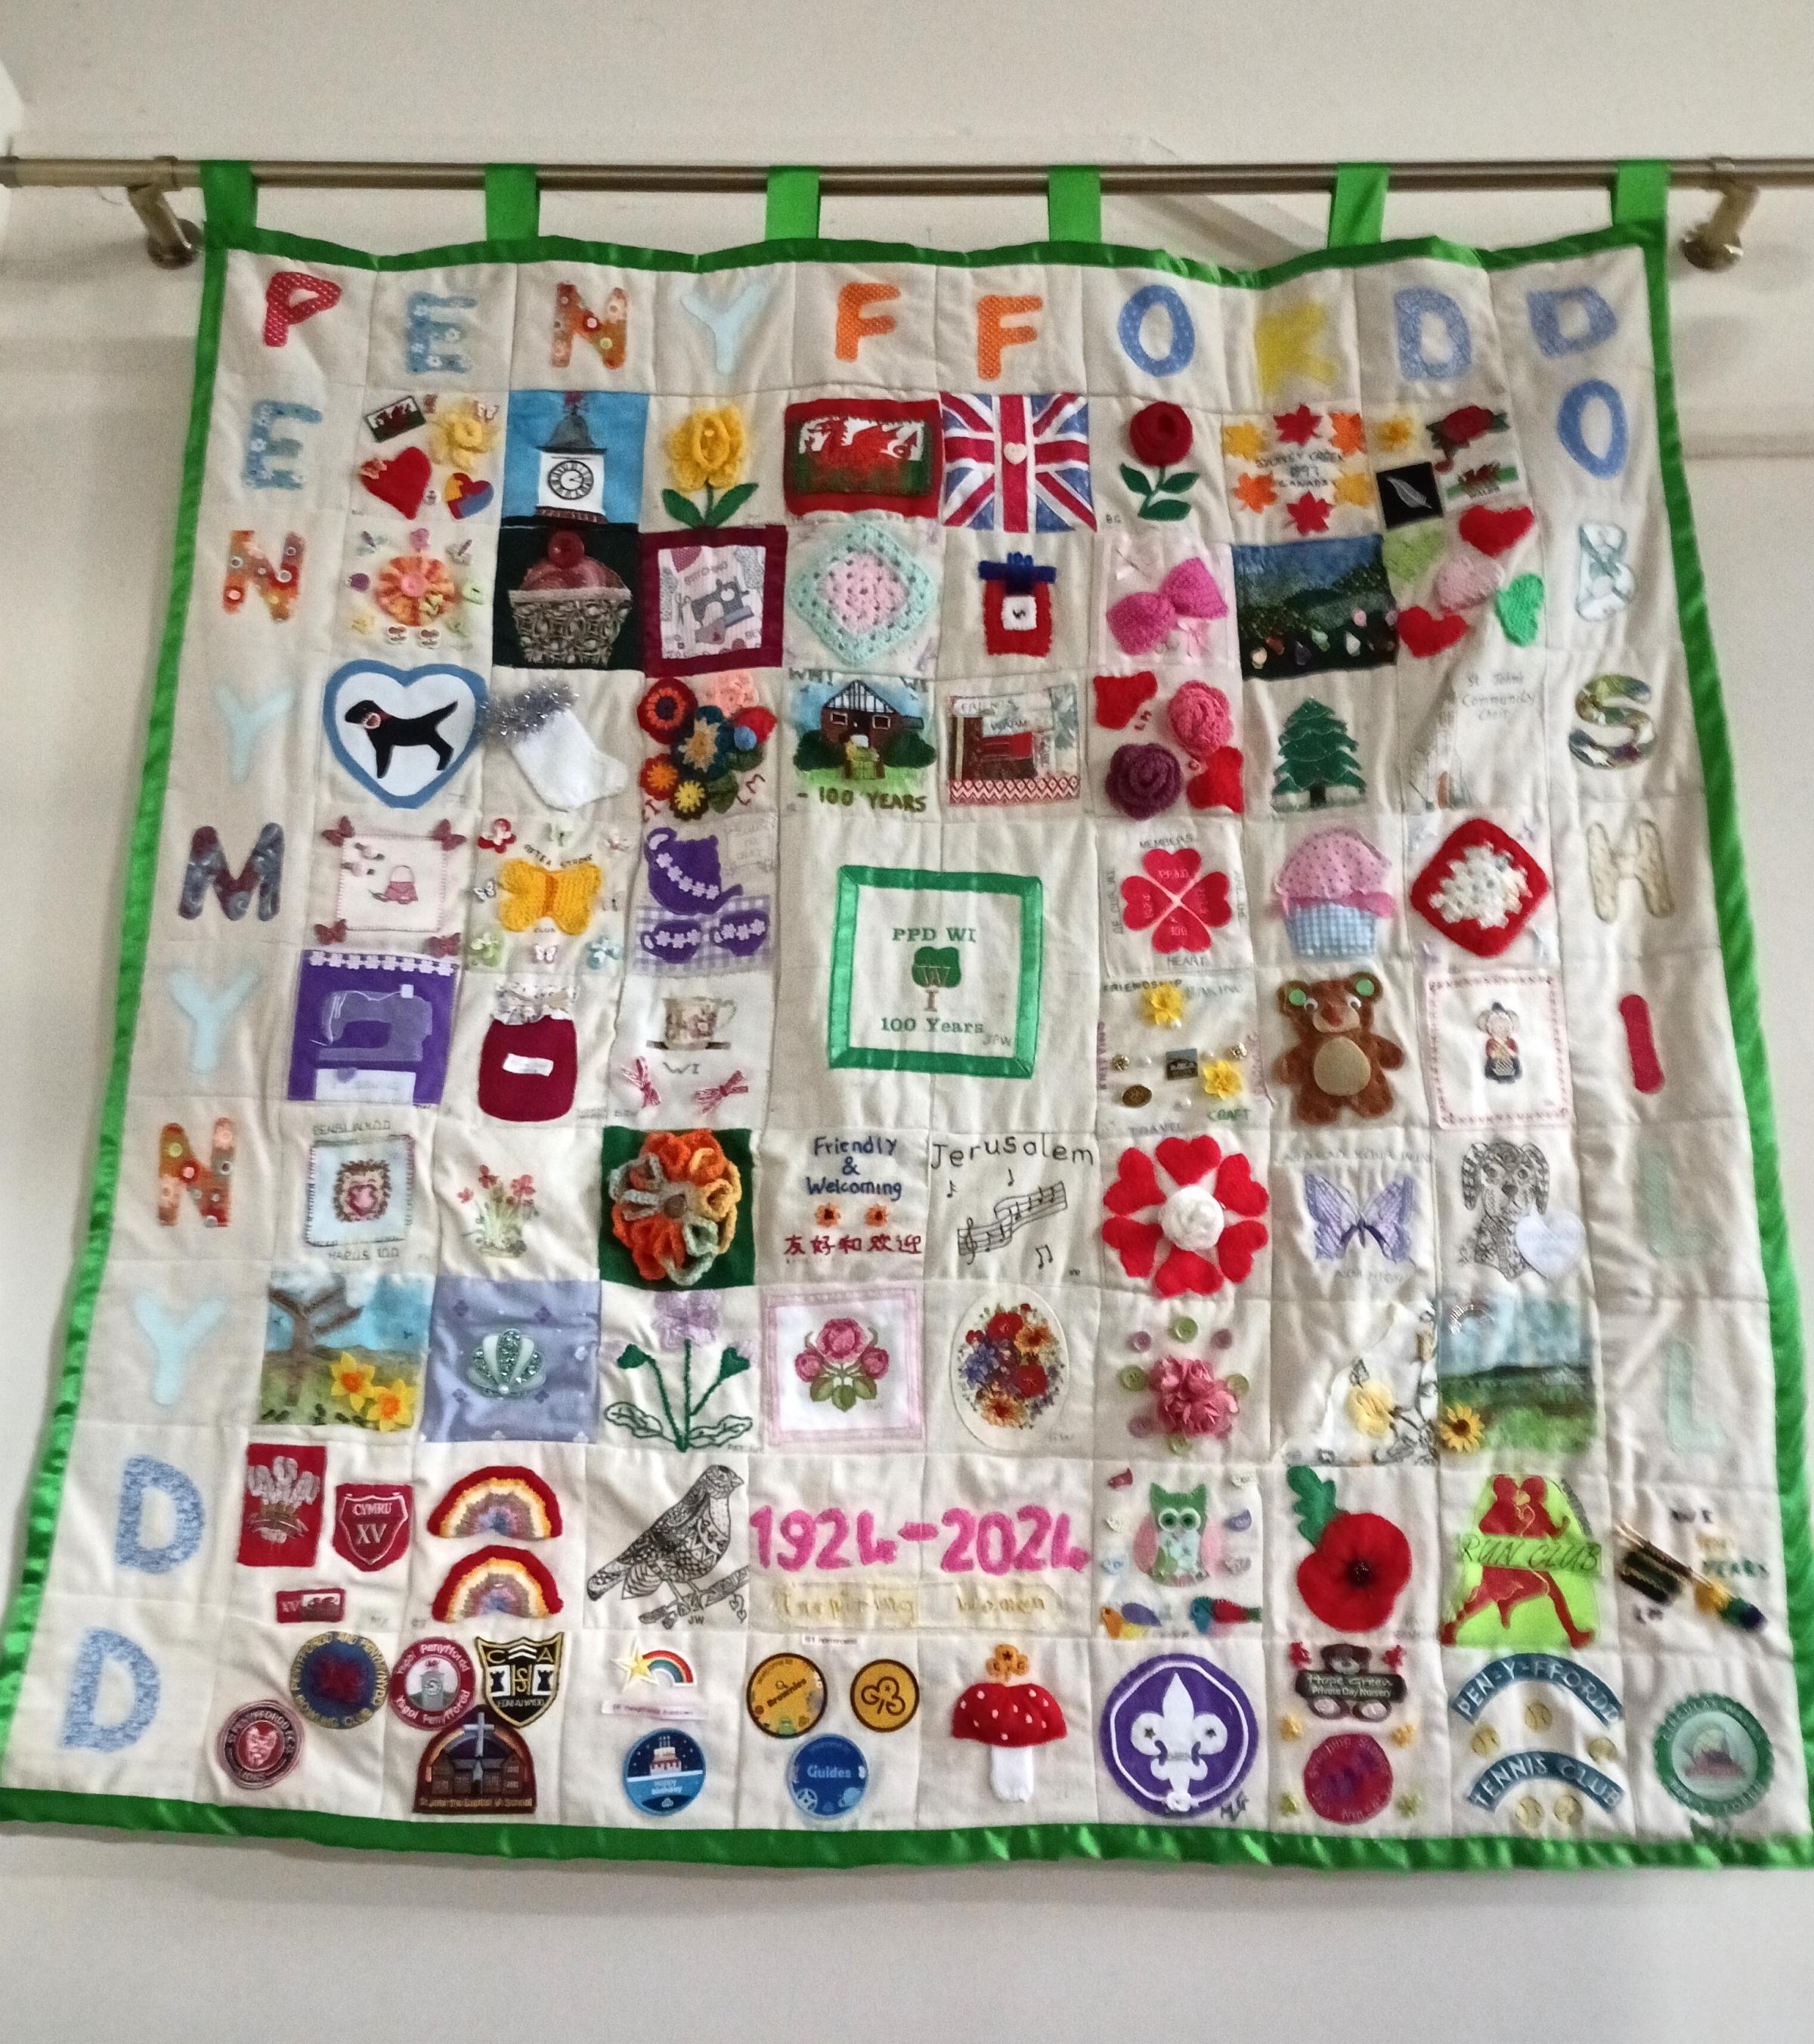 The finished quilt of the Penyffordd, Penymynydd and Dobshill WI.